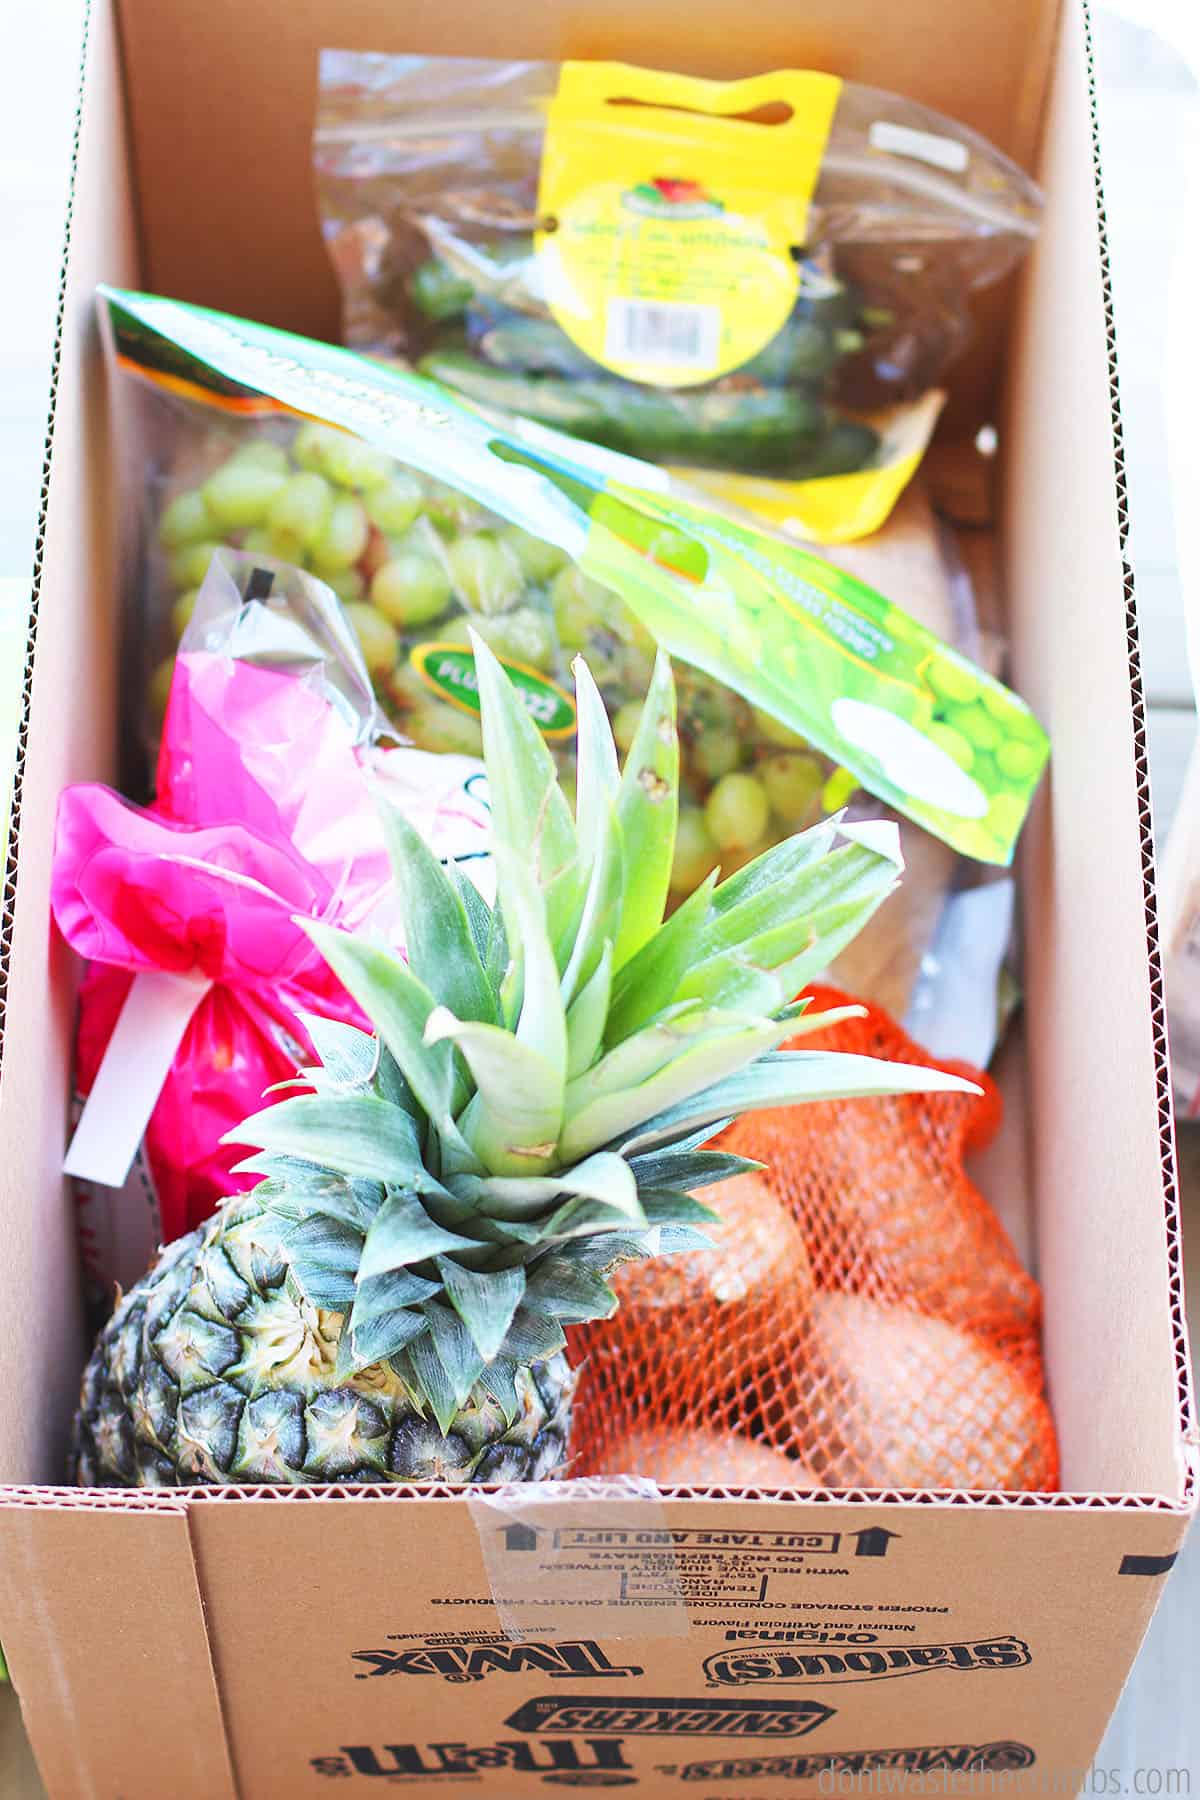 Cucumbers, grapes, sweet potatoes, pineapple and onion in a box that were ordered via the Instacart grocery delivery service.